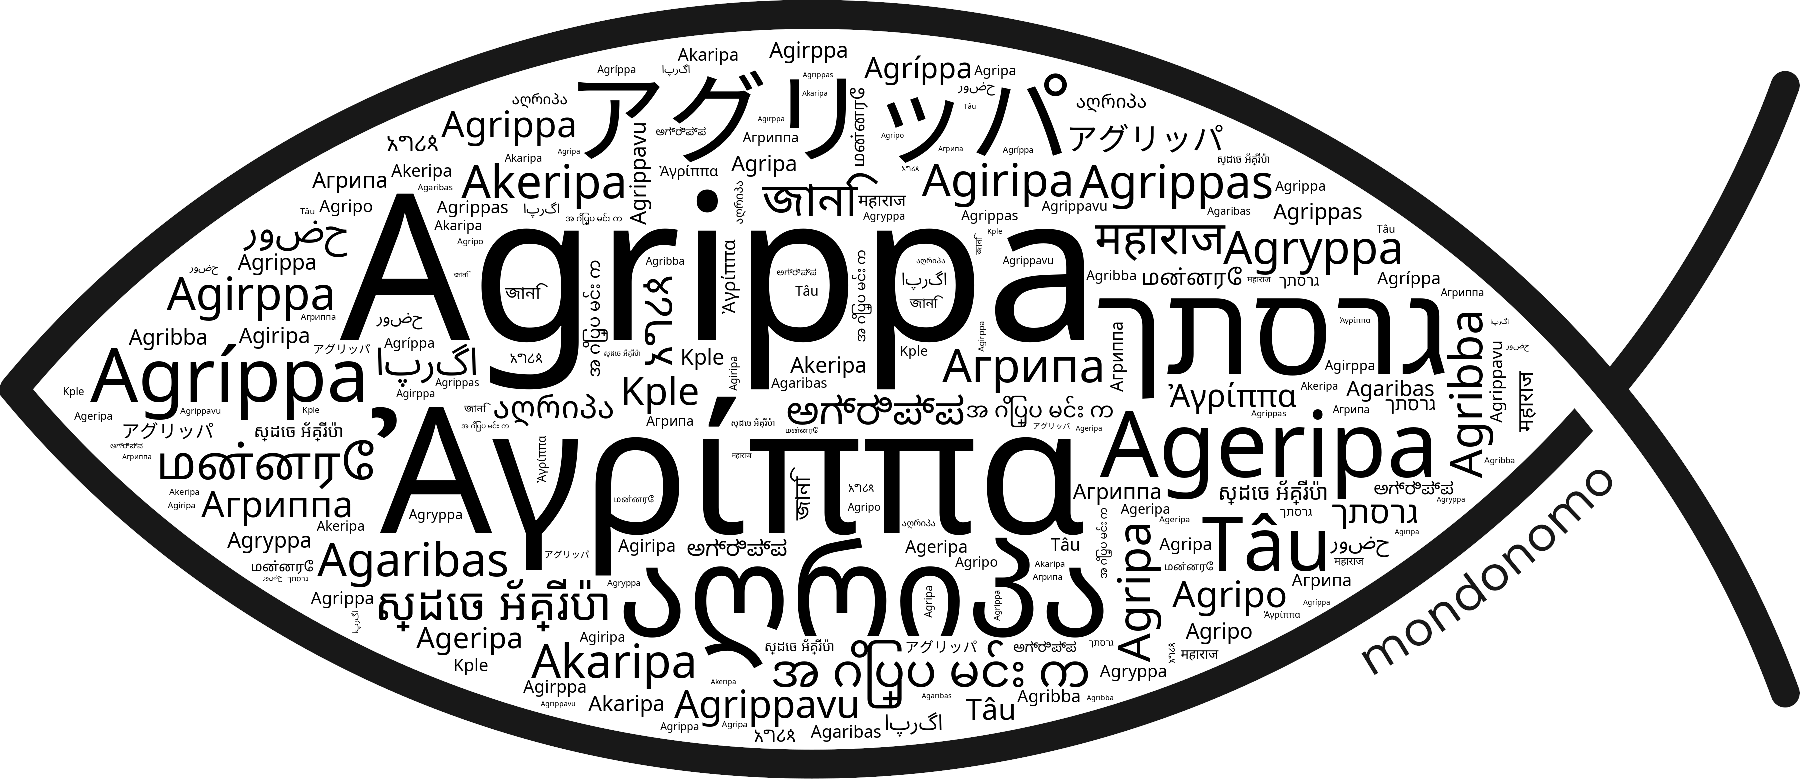 Name Agrippa in the world's Bibles